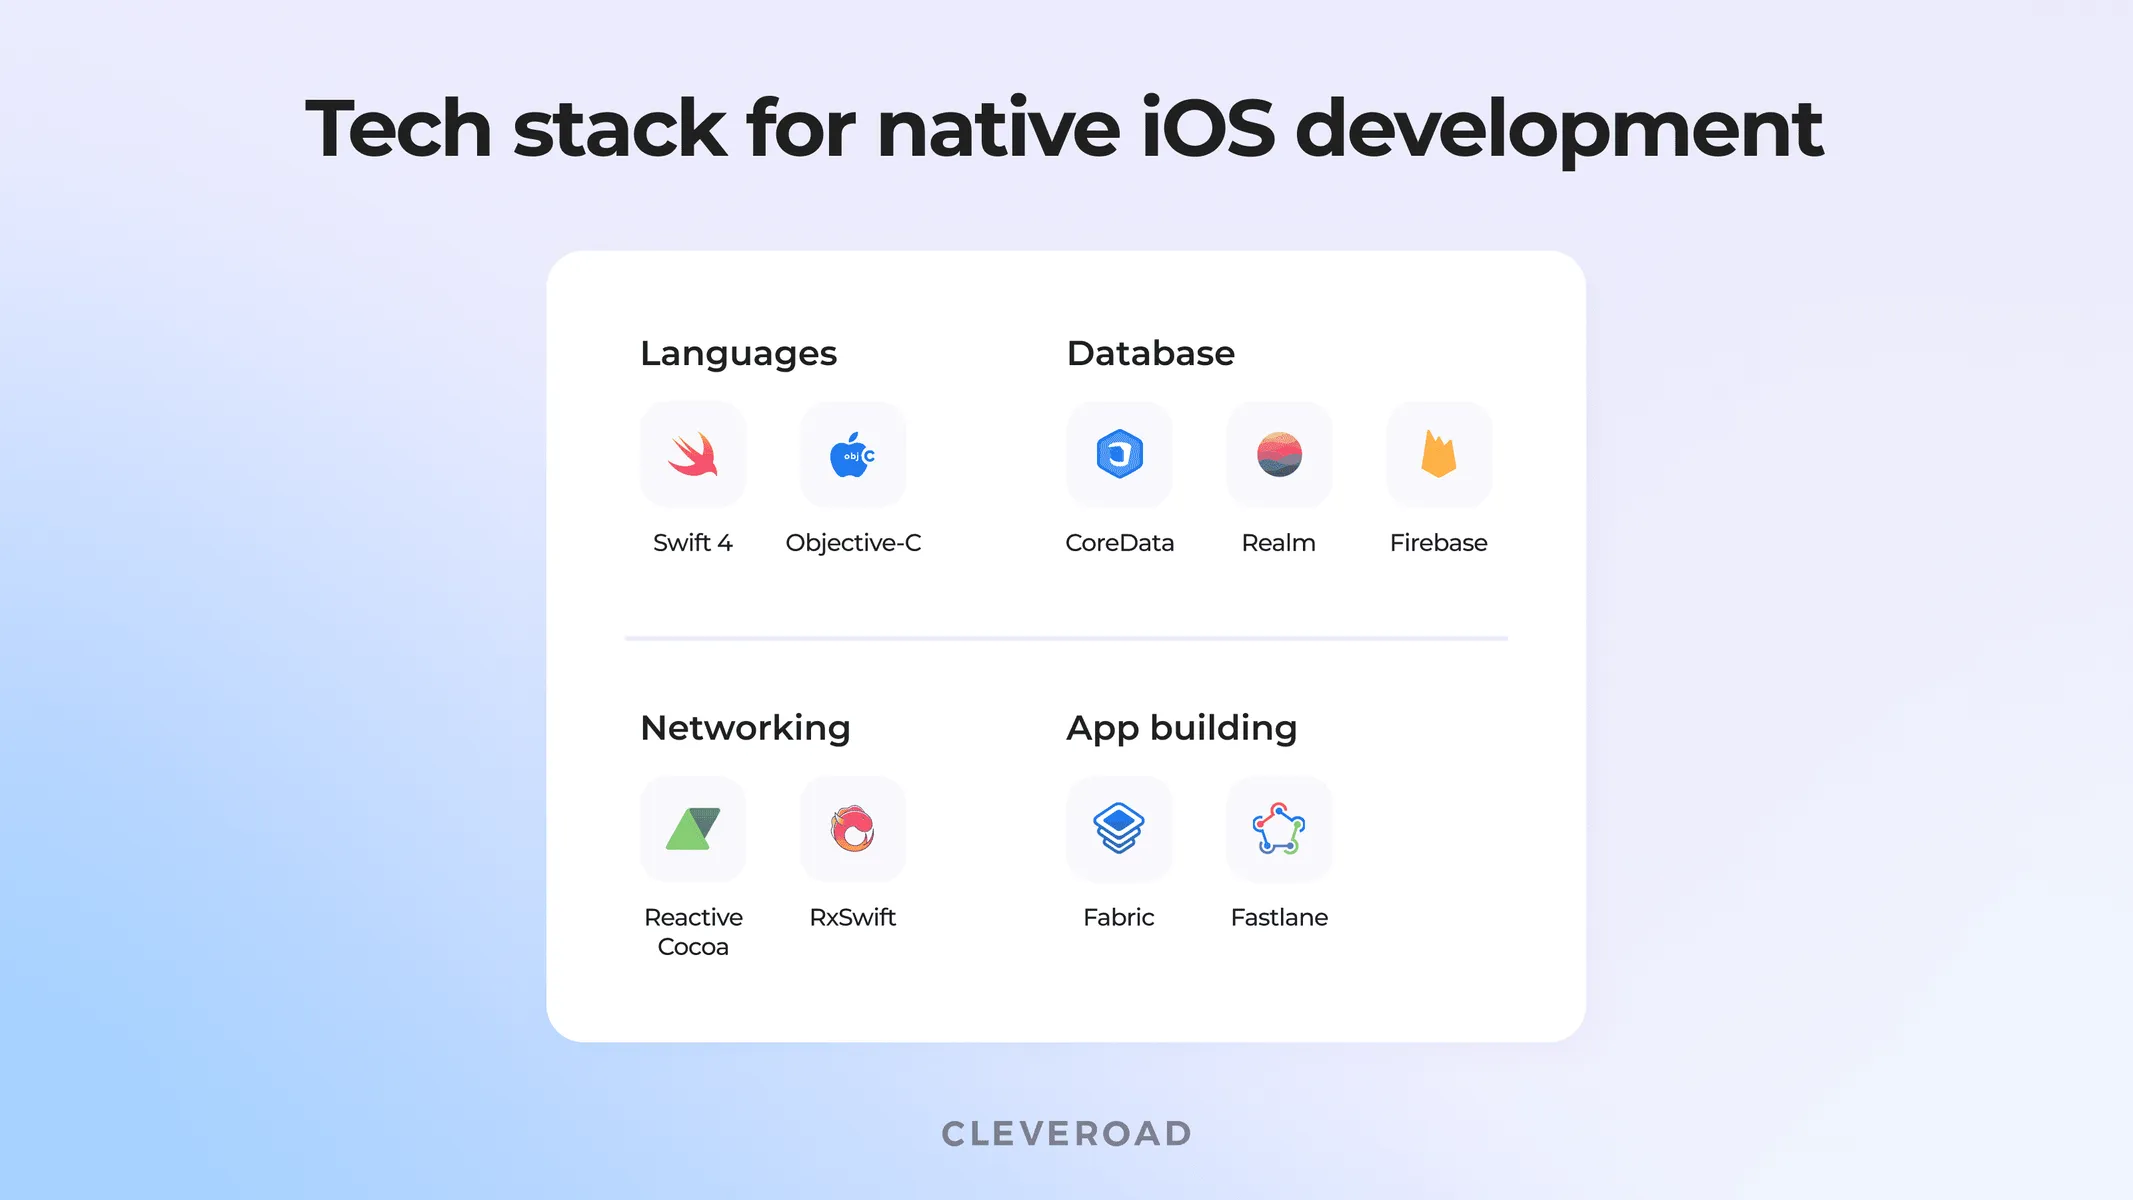 Required technologies to build a native iOS app